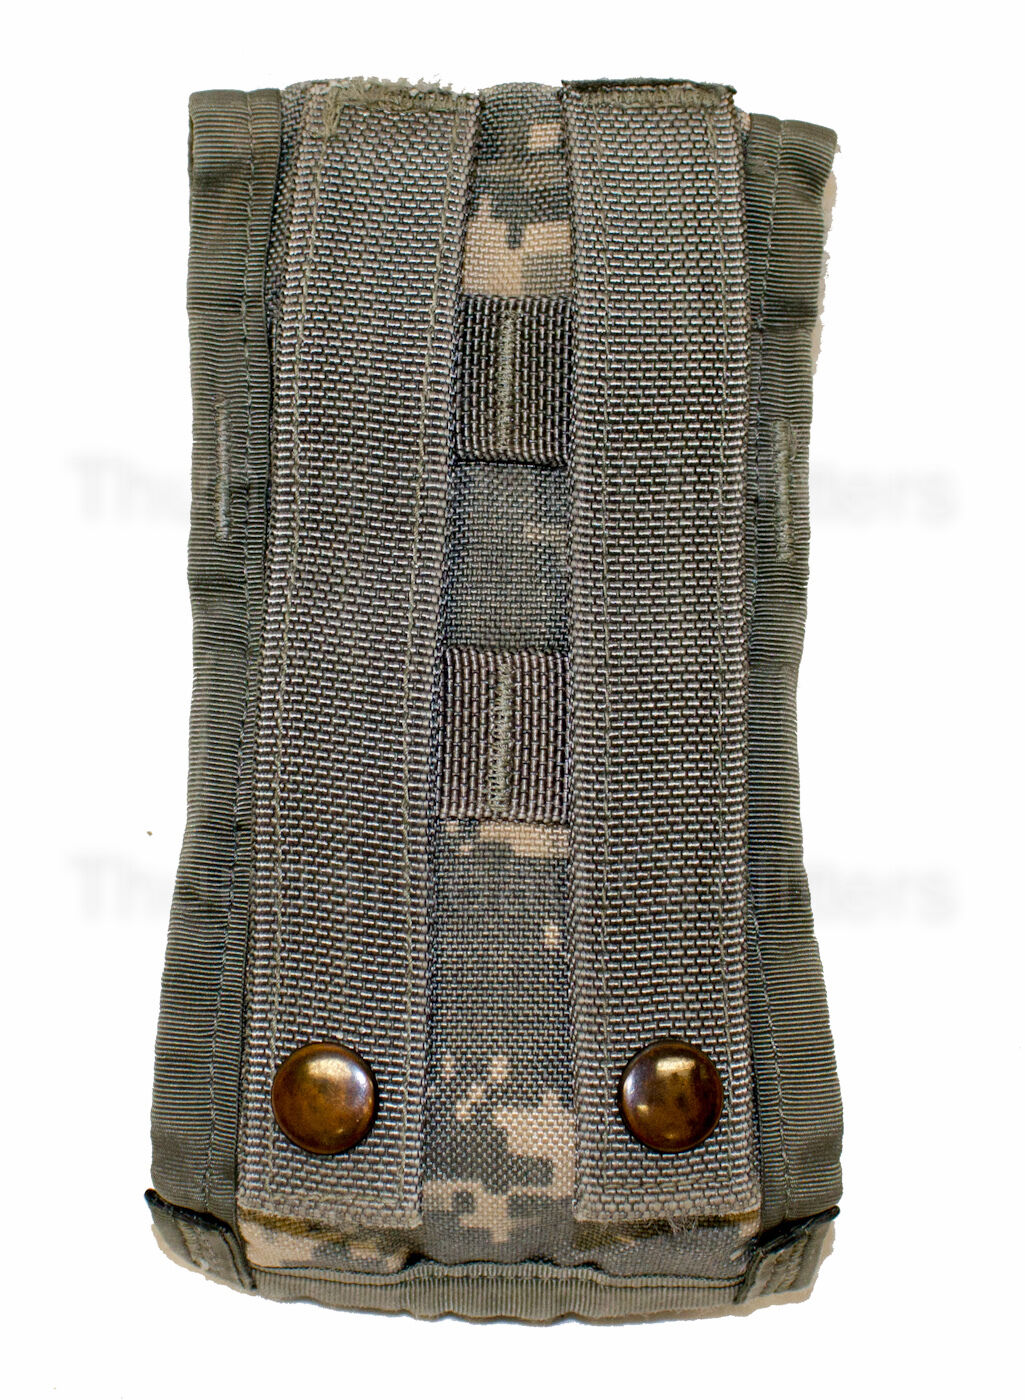 SET OF 2 - US Army ACU DOUBLE MAG POUCH Ammo Magazine Utility MOLLE USGI VGC US Military Contractor W911QY-06-D-0003-0001 - фотография #4